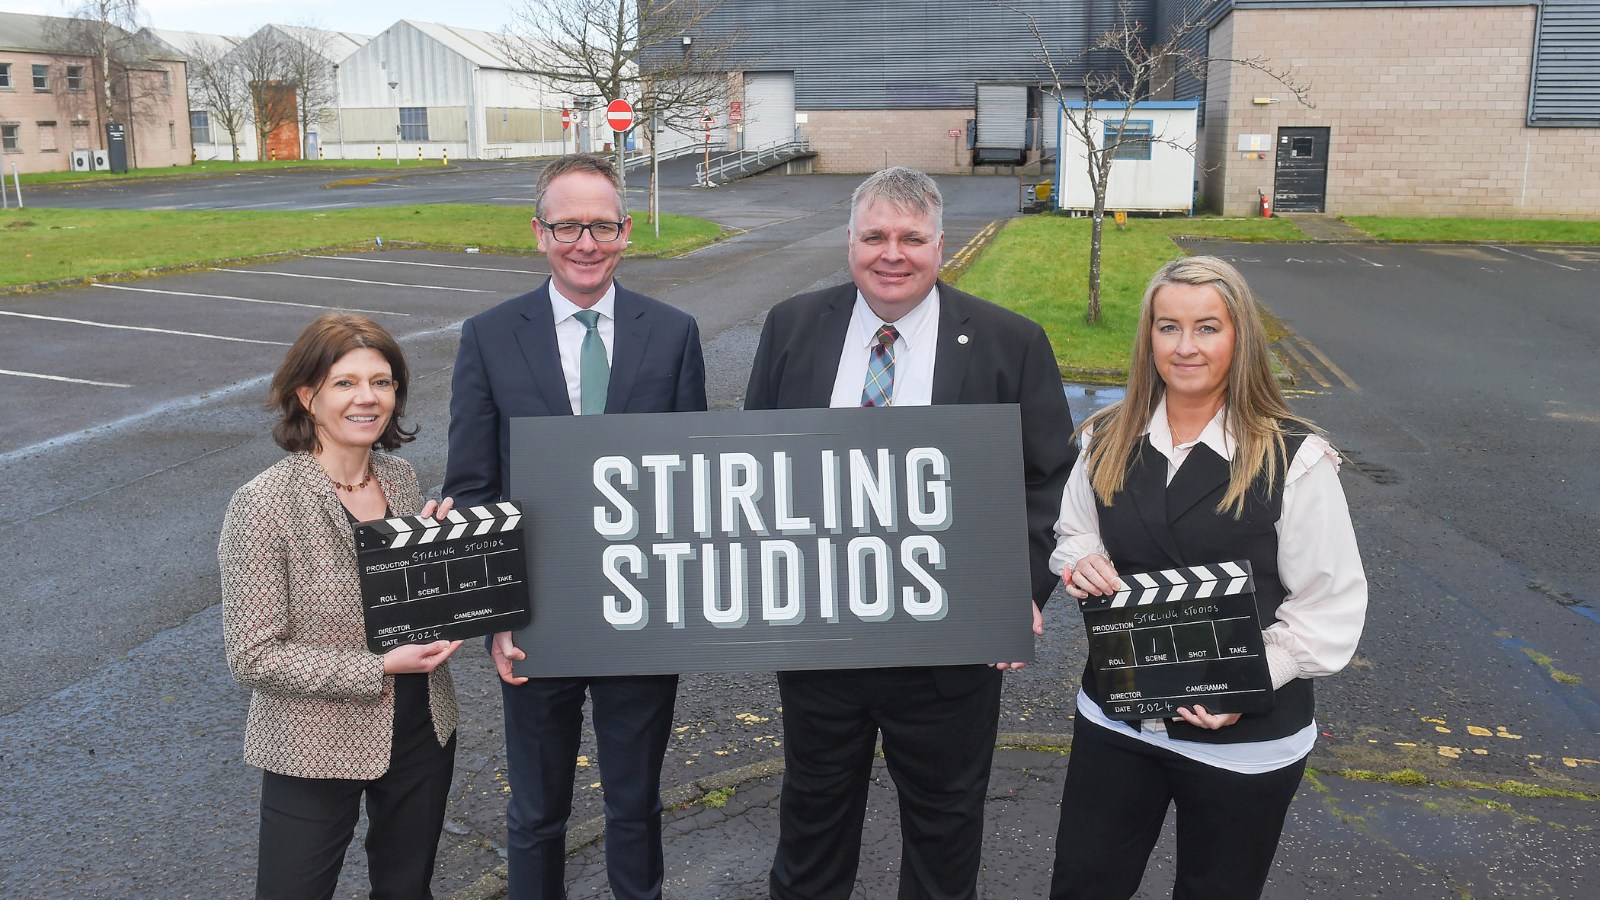 Pictured at the former MoD land that will become Stirling Studios are (from left) Isabel Davis, Executive Director of Screen Scotland; UK Government Minister for Scotland John Lamont MP; Stirling Council Leader, Cllr Chris Kane; Stirling Council Chief Executive, Carol Beattie